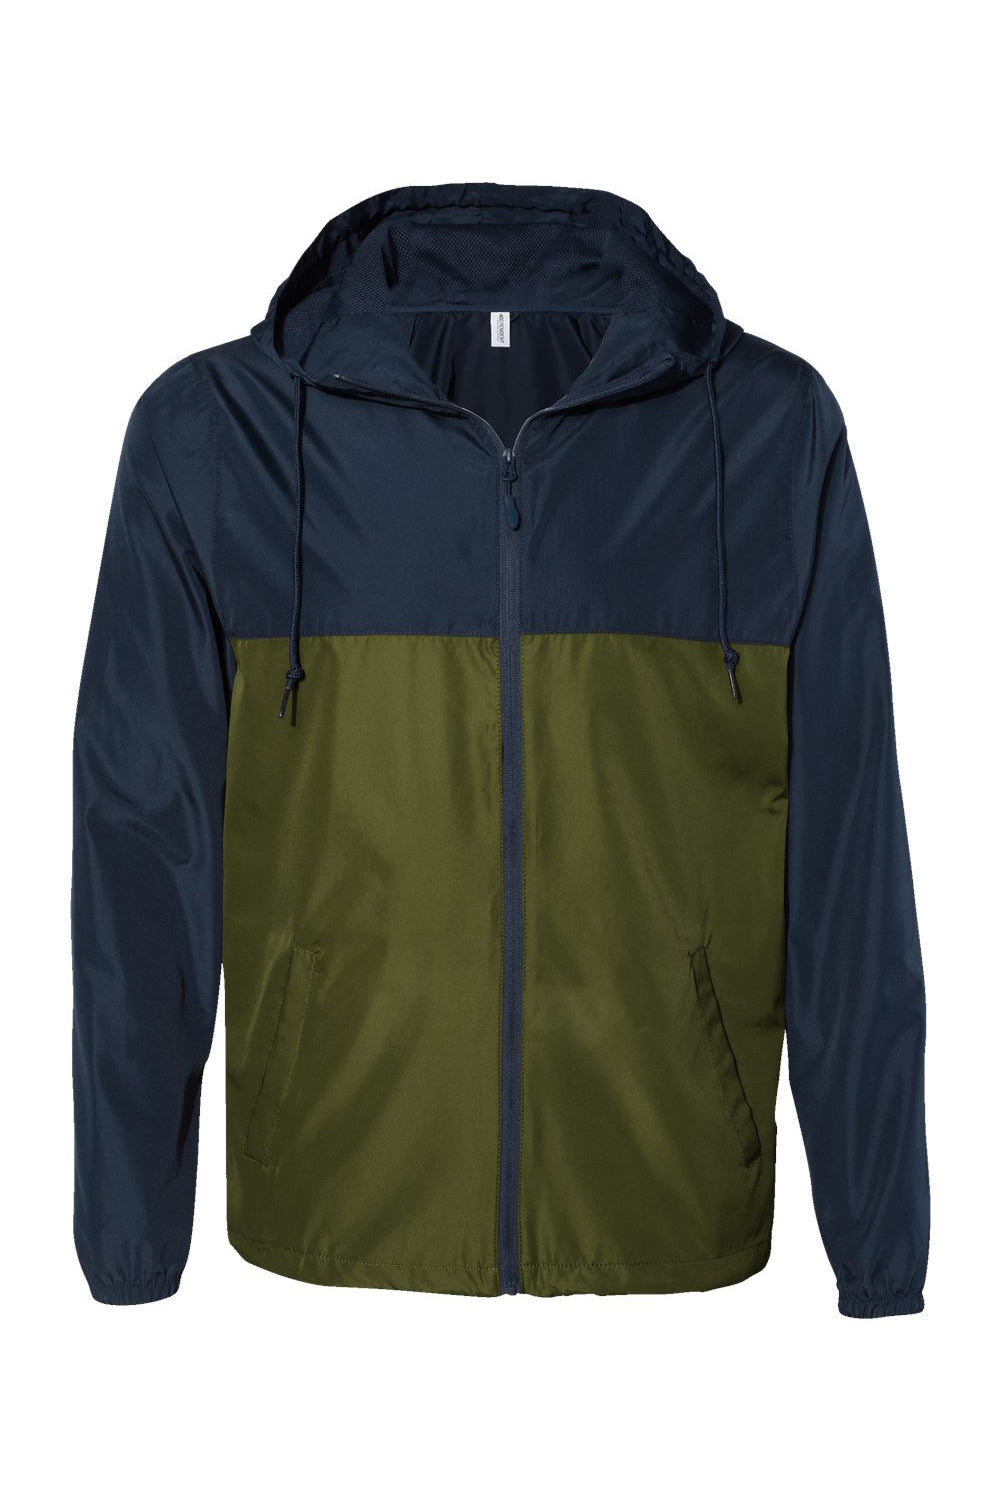 Independent Trading Co. EXP54LWZ Mens Full Zip Windbreaker Hooded Jacket Classic Navy Blue/Army Green Flat Front